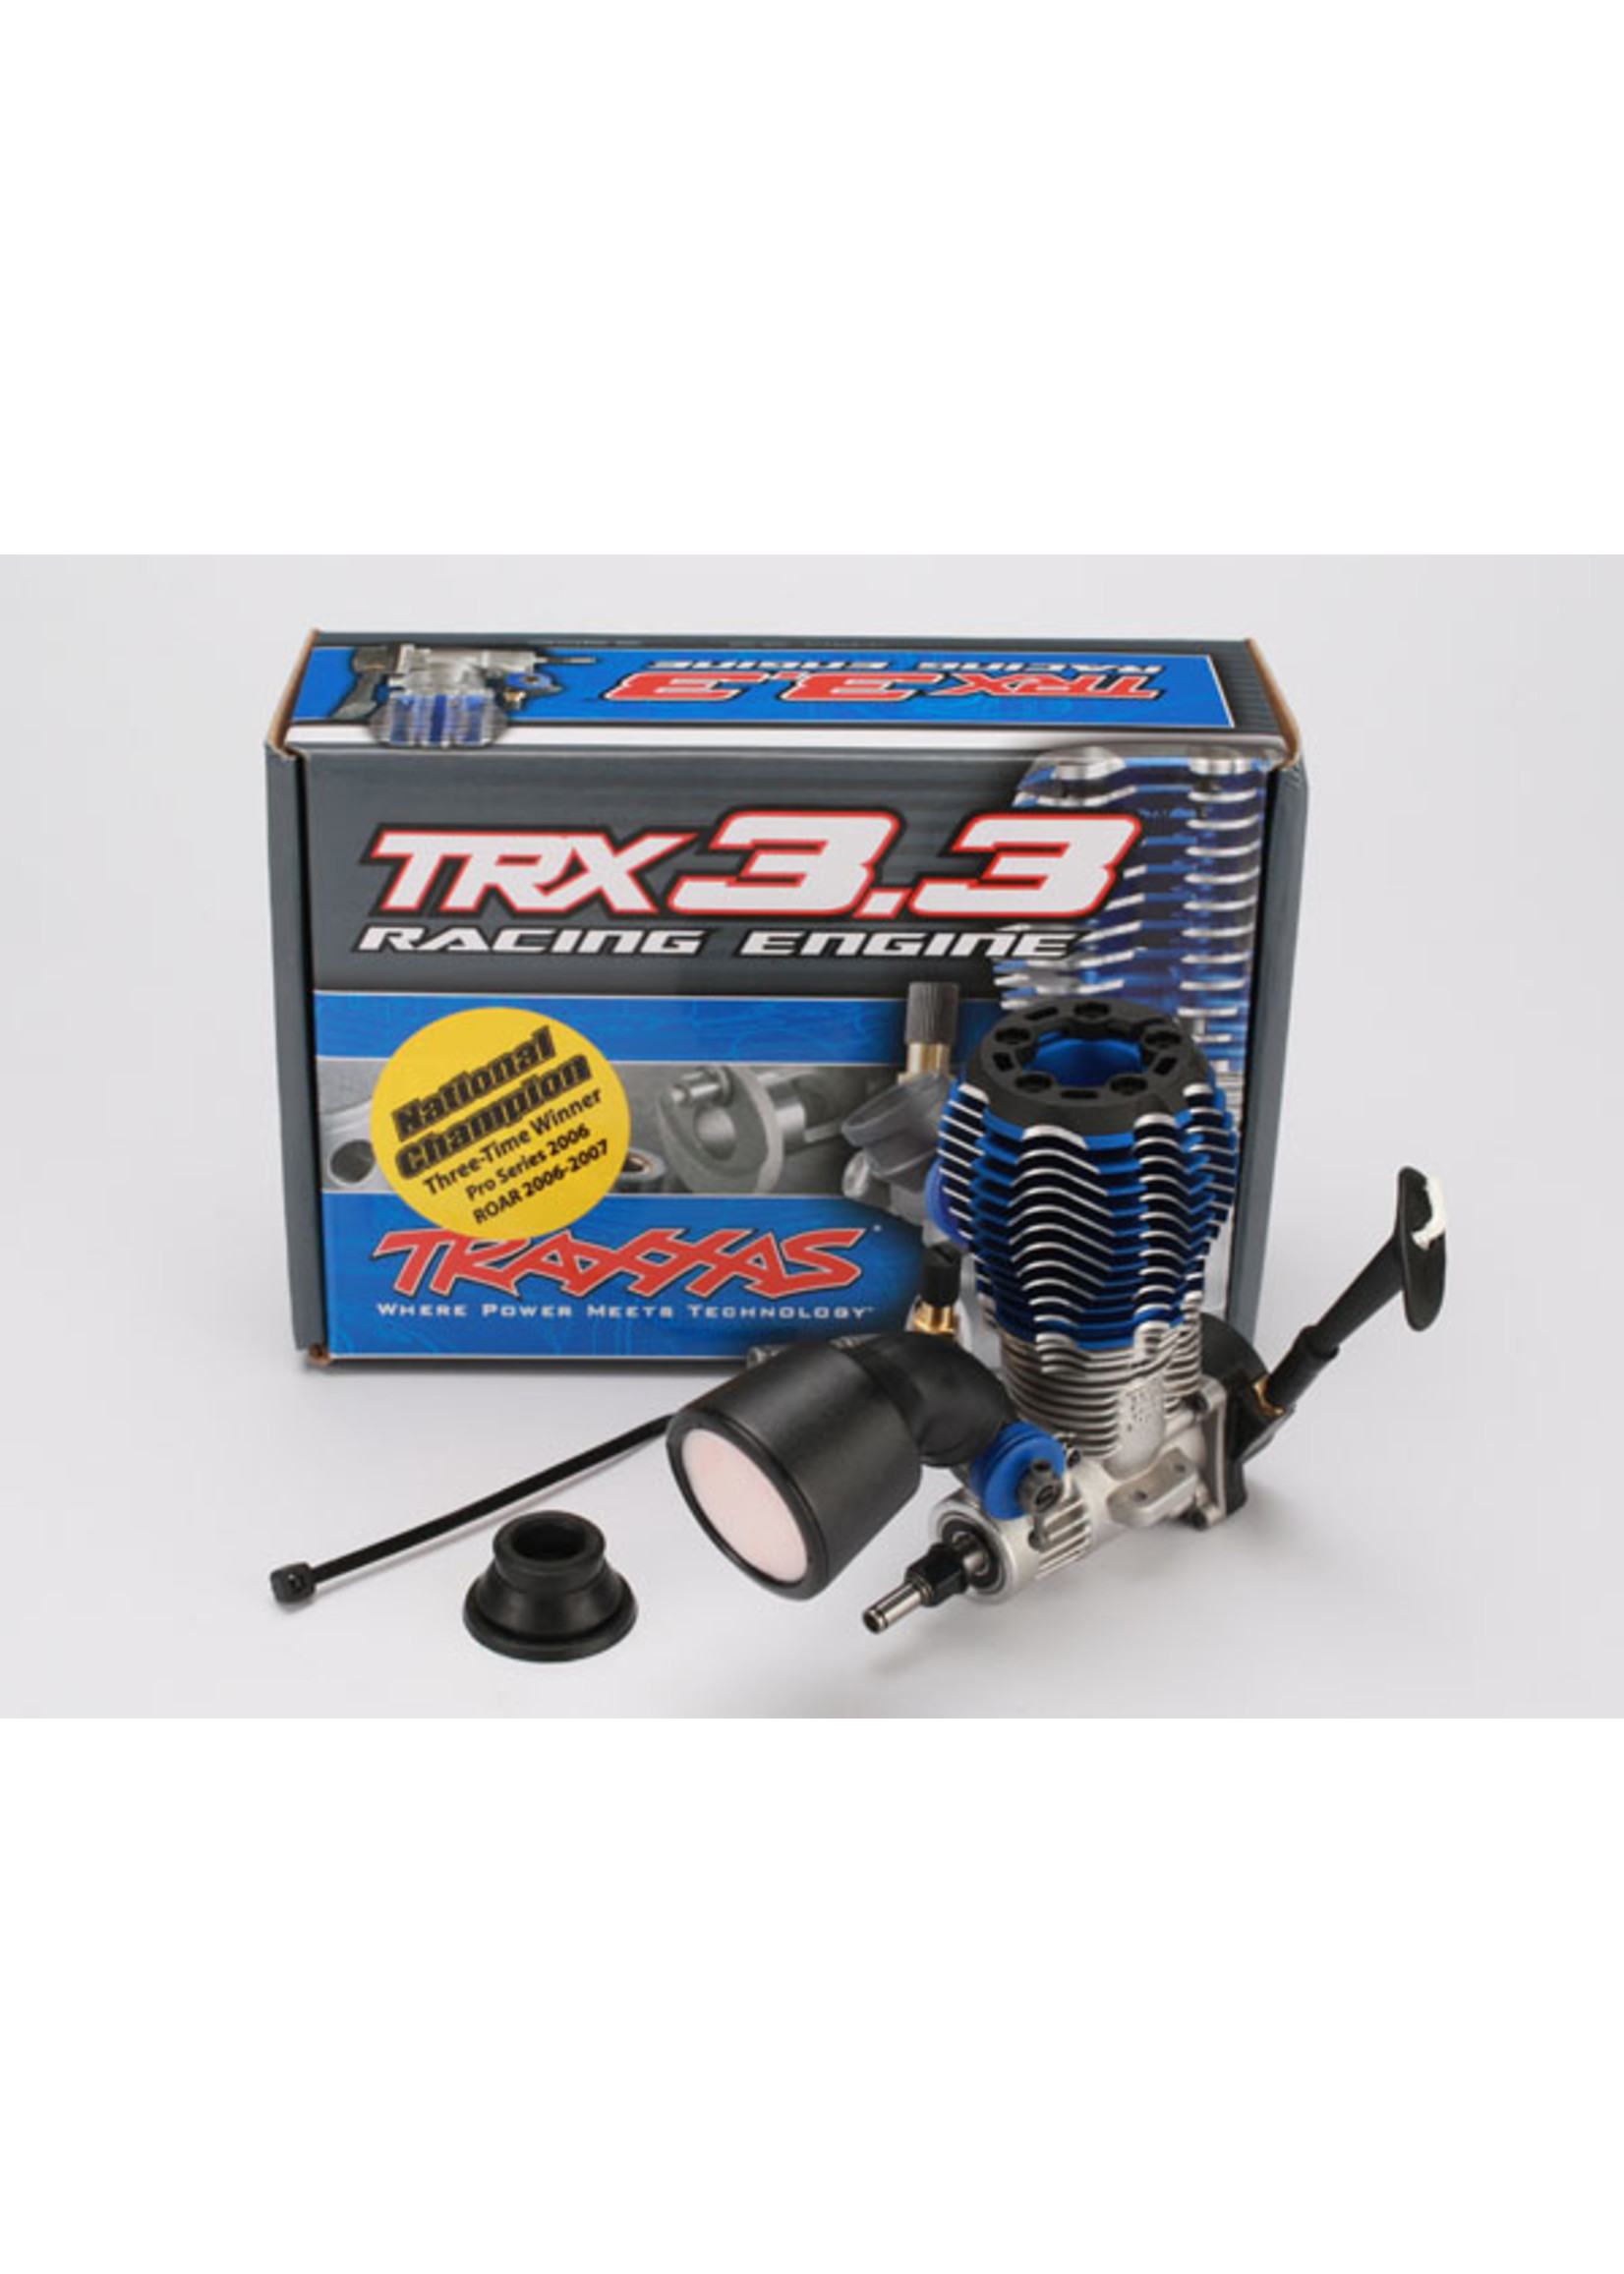 Traxxas 5407 - TRX® 3.3 Engine IPS Shaft with Recoil Starter